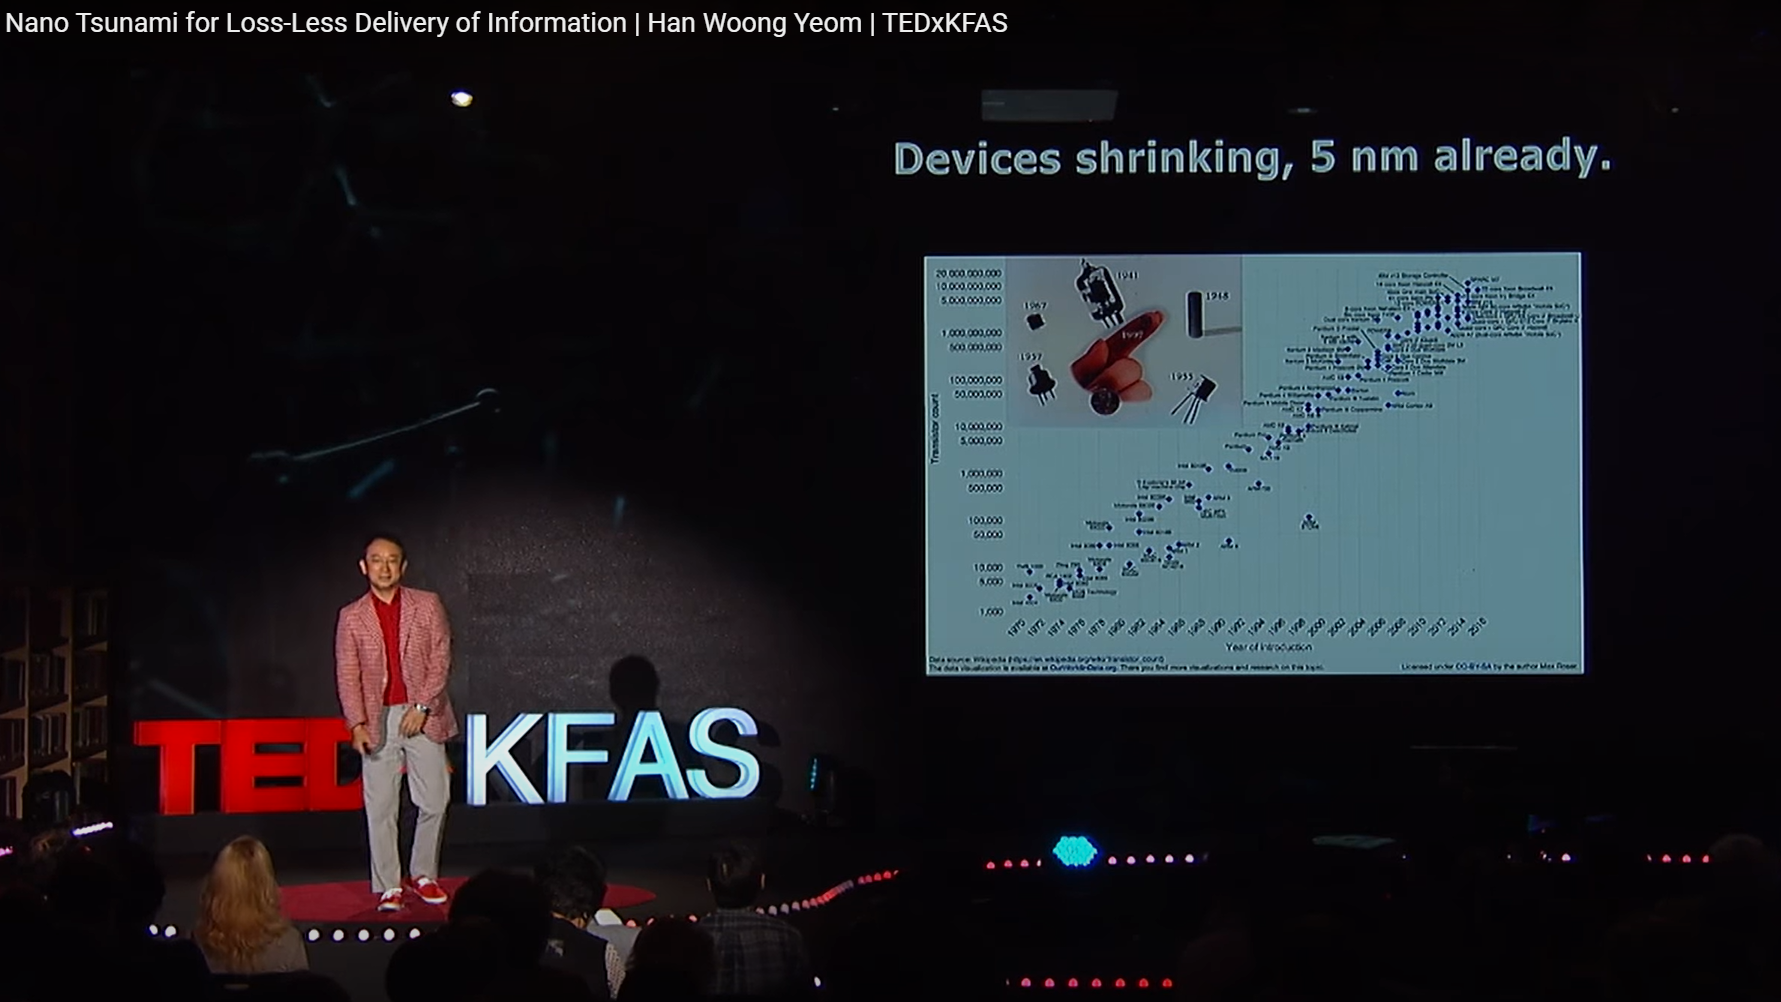 [TEDxKFAS] Nano Tsunami for Loss-Less Delivery of Information | Han Woong Yeom 사진